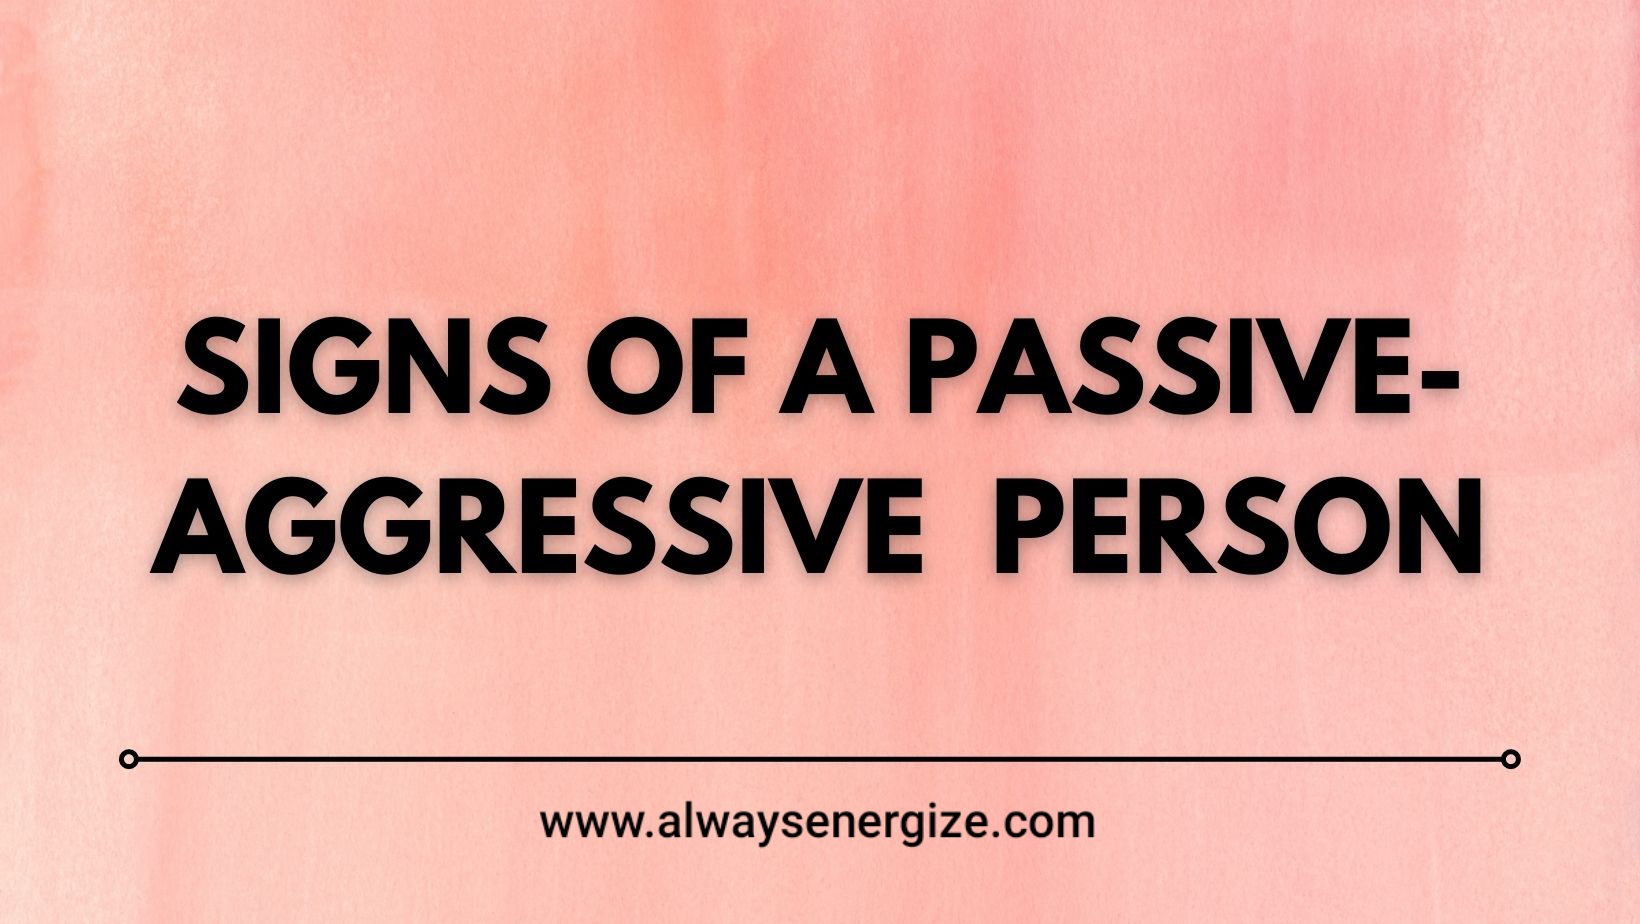 How To Stop Being Passive-Aggressive